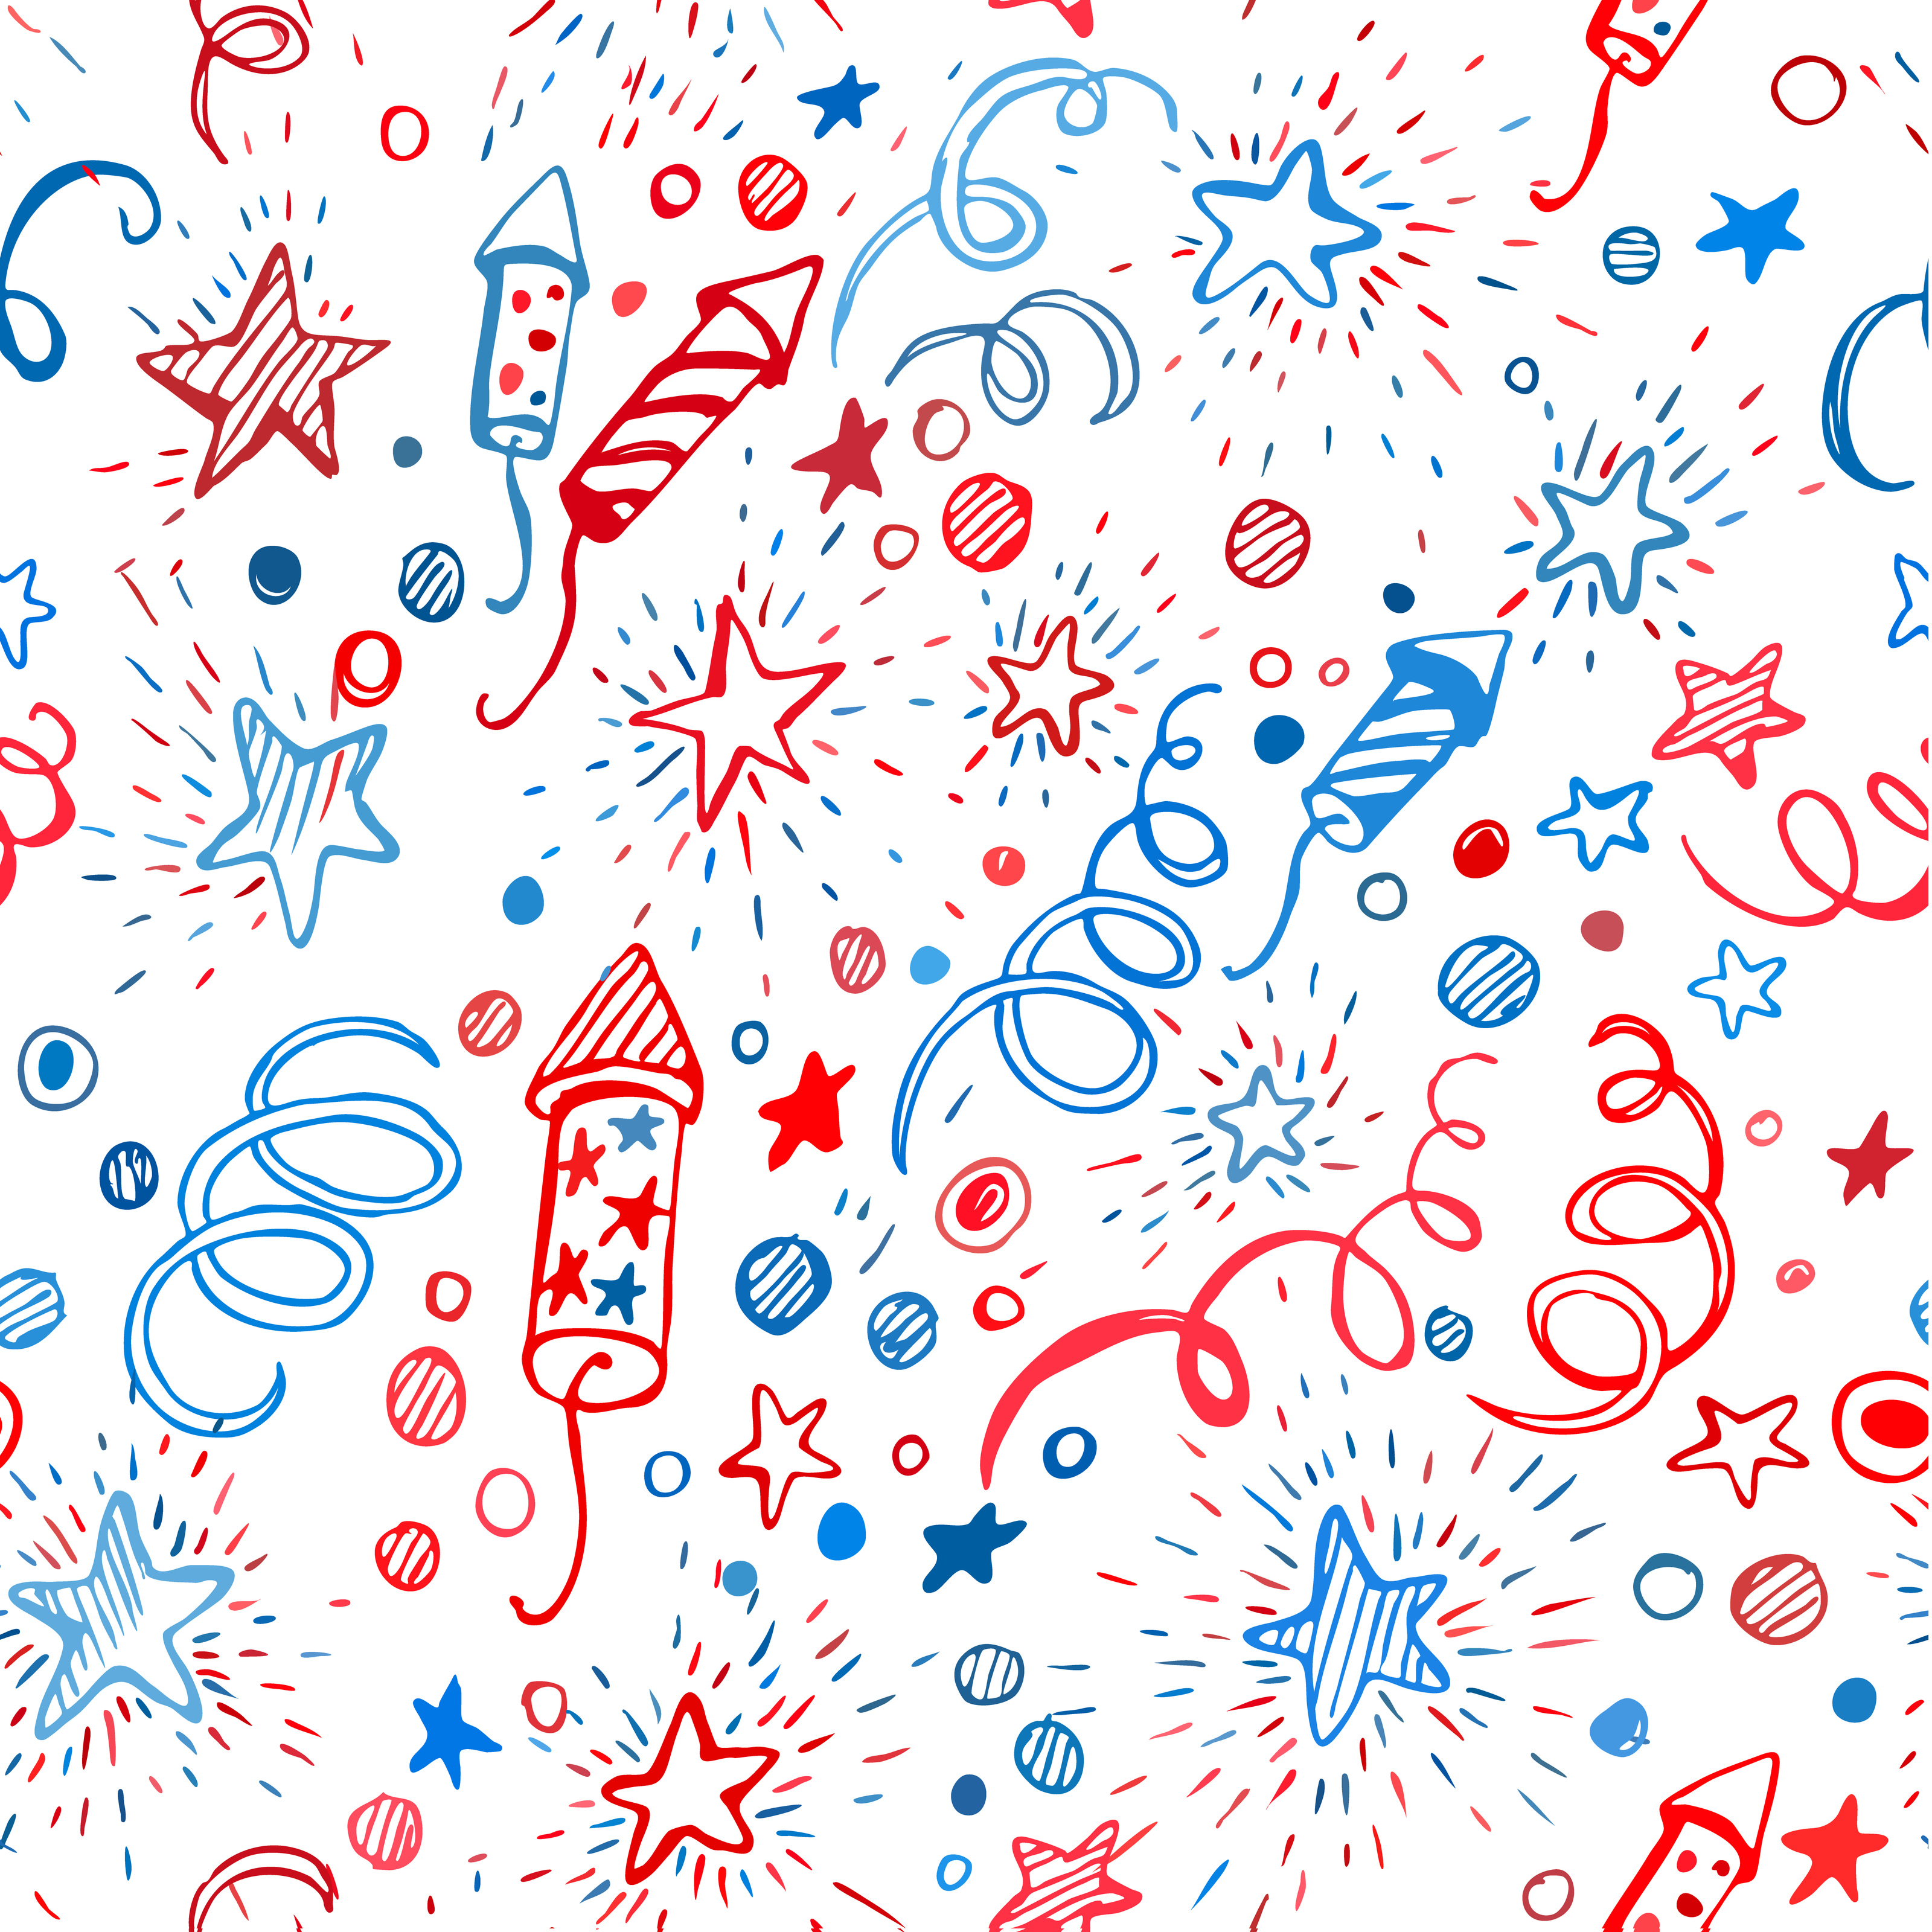 4th of july wallpaper